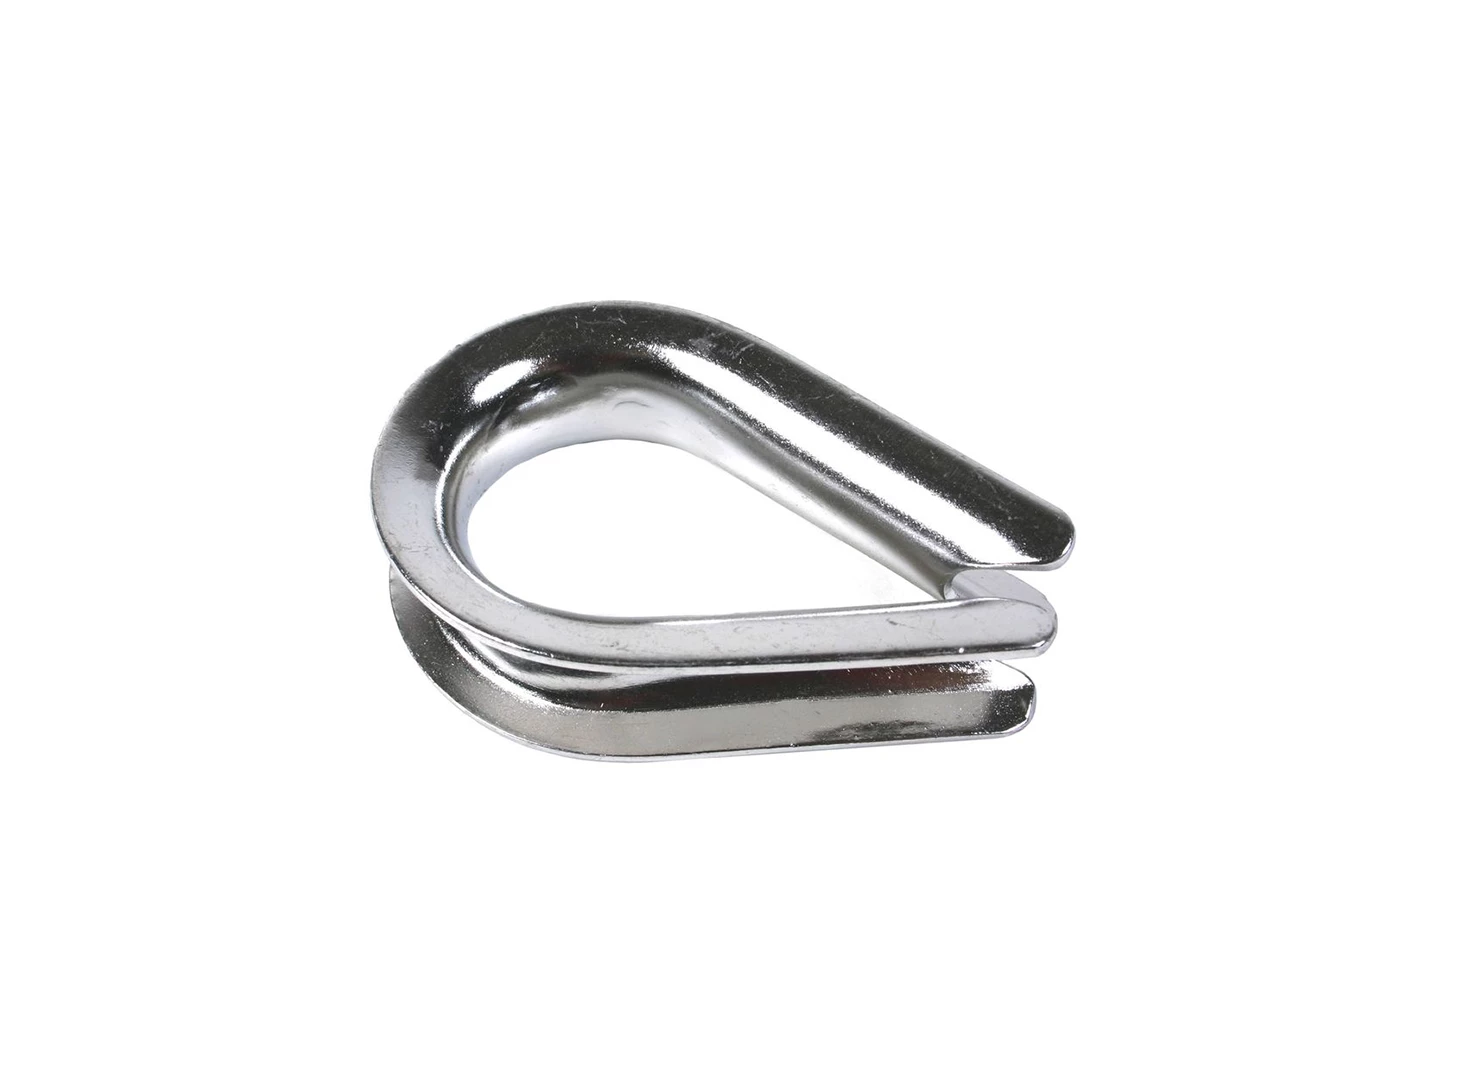 Product: Thimble 14-16mm